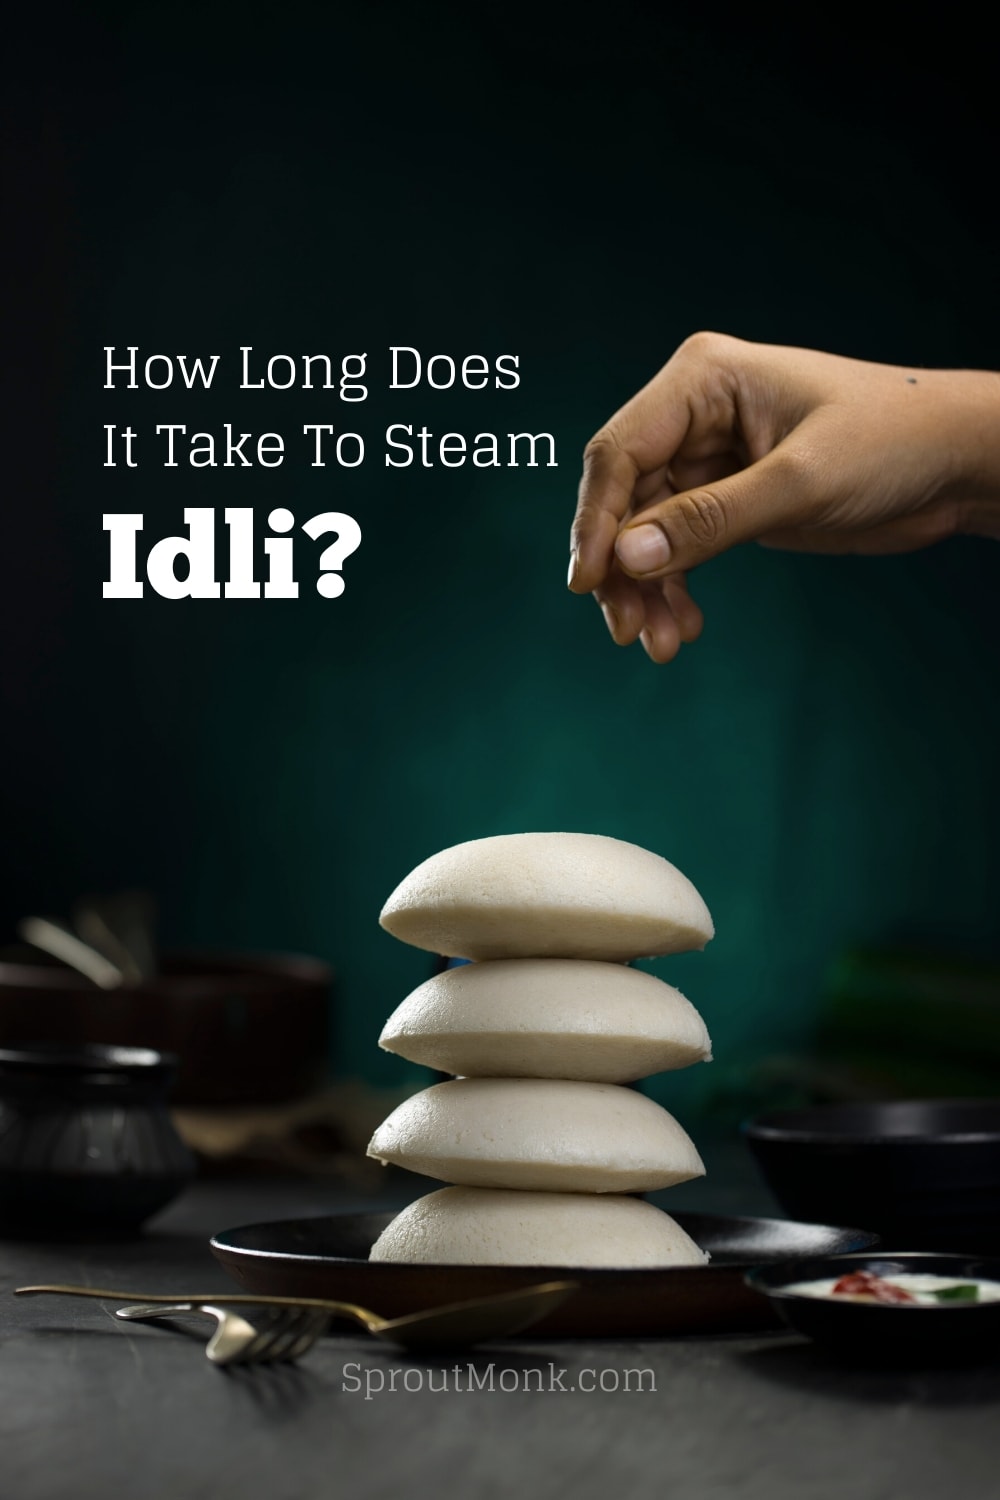 how long to steam idli cover image